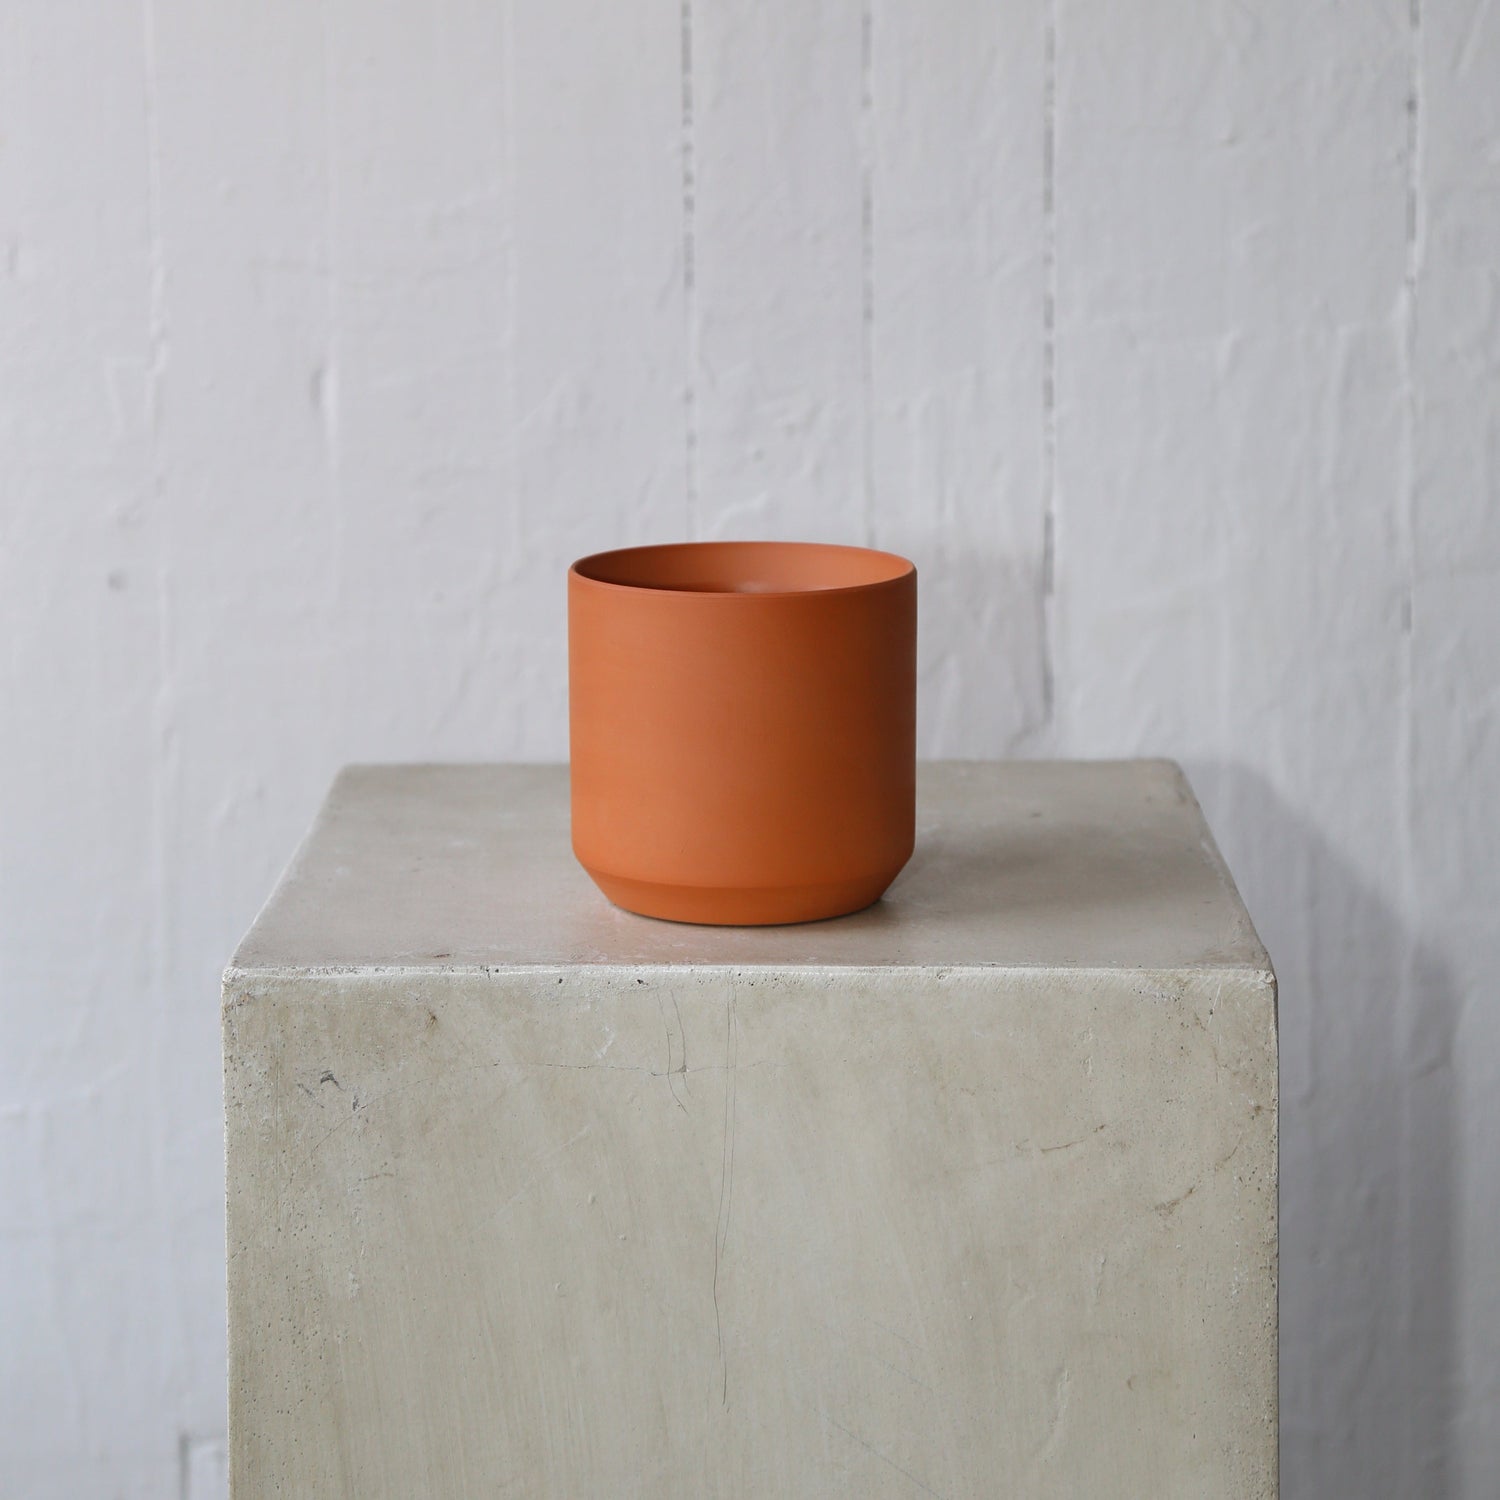 4.5" Terracotta Kendall Pot available for Rook & Rose.